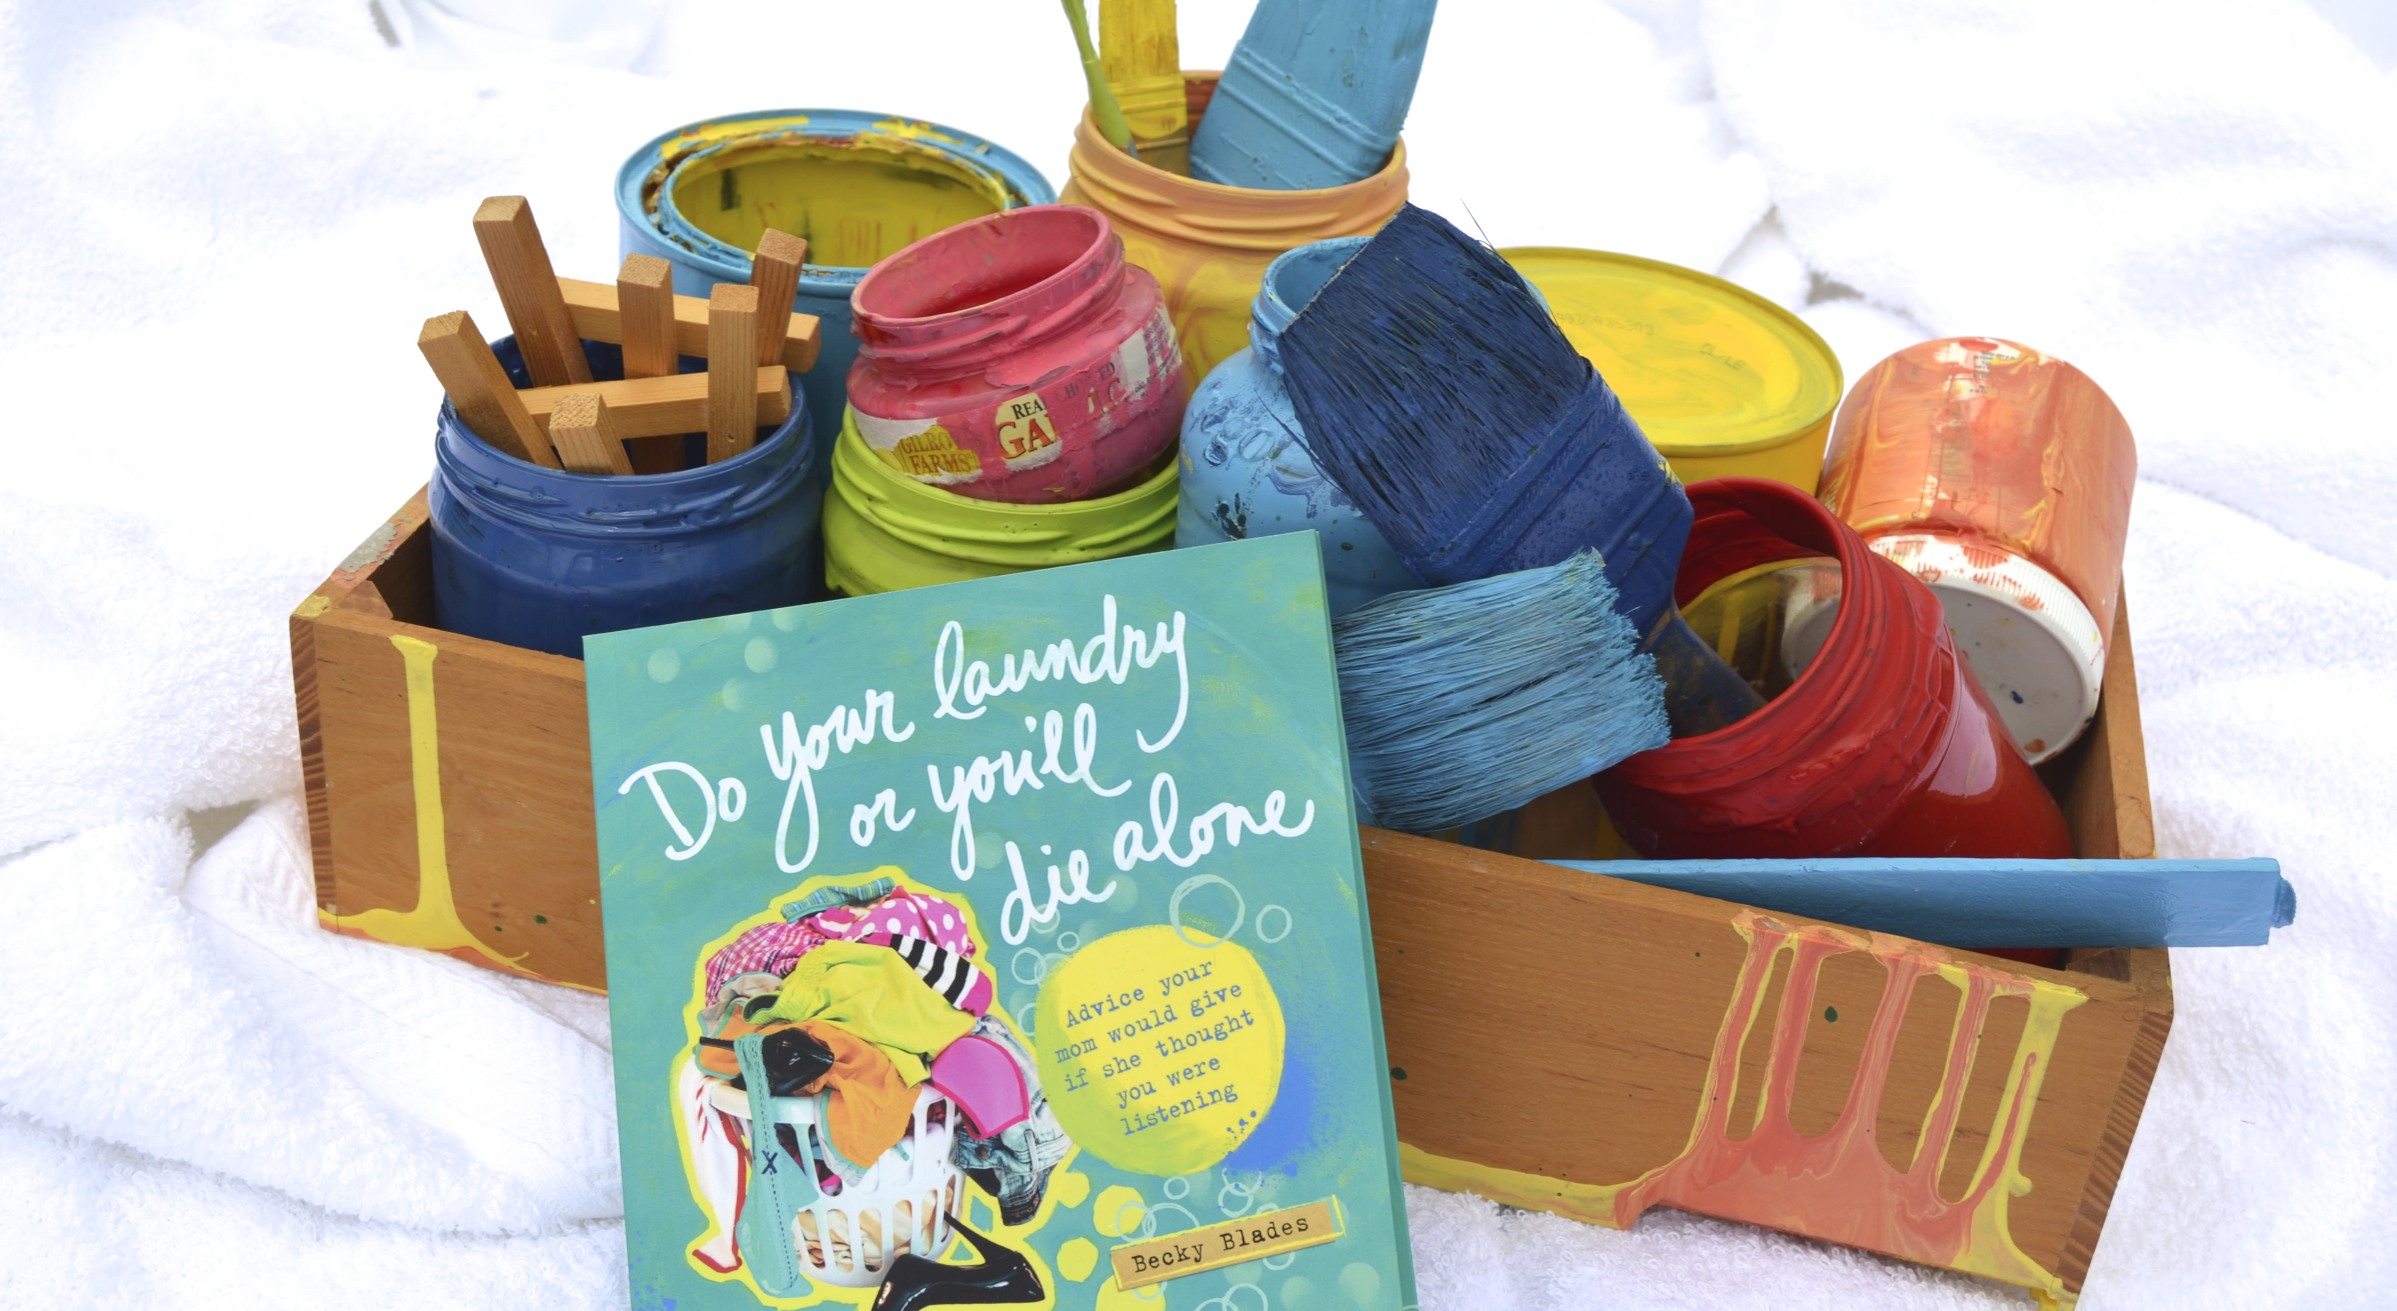 do your laundry or you'll die alone book with crafting materials and paint